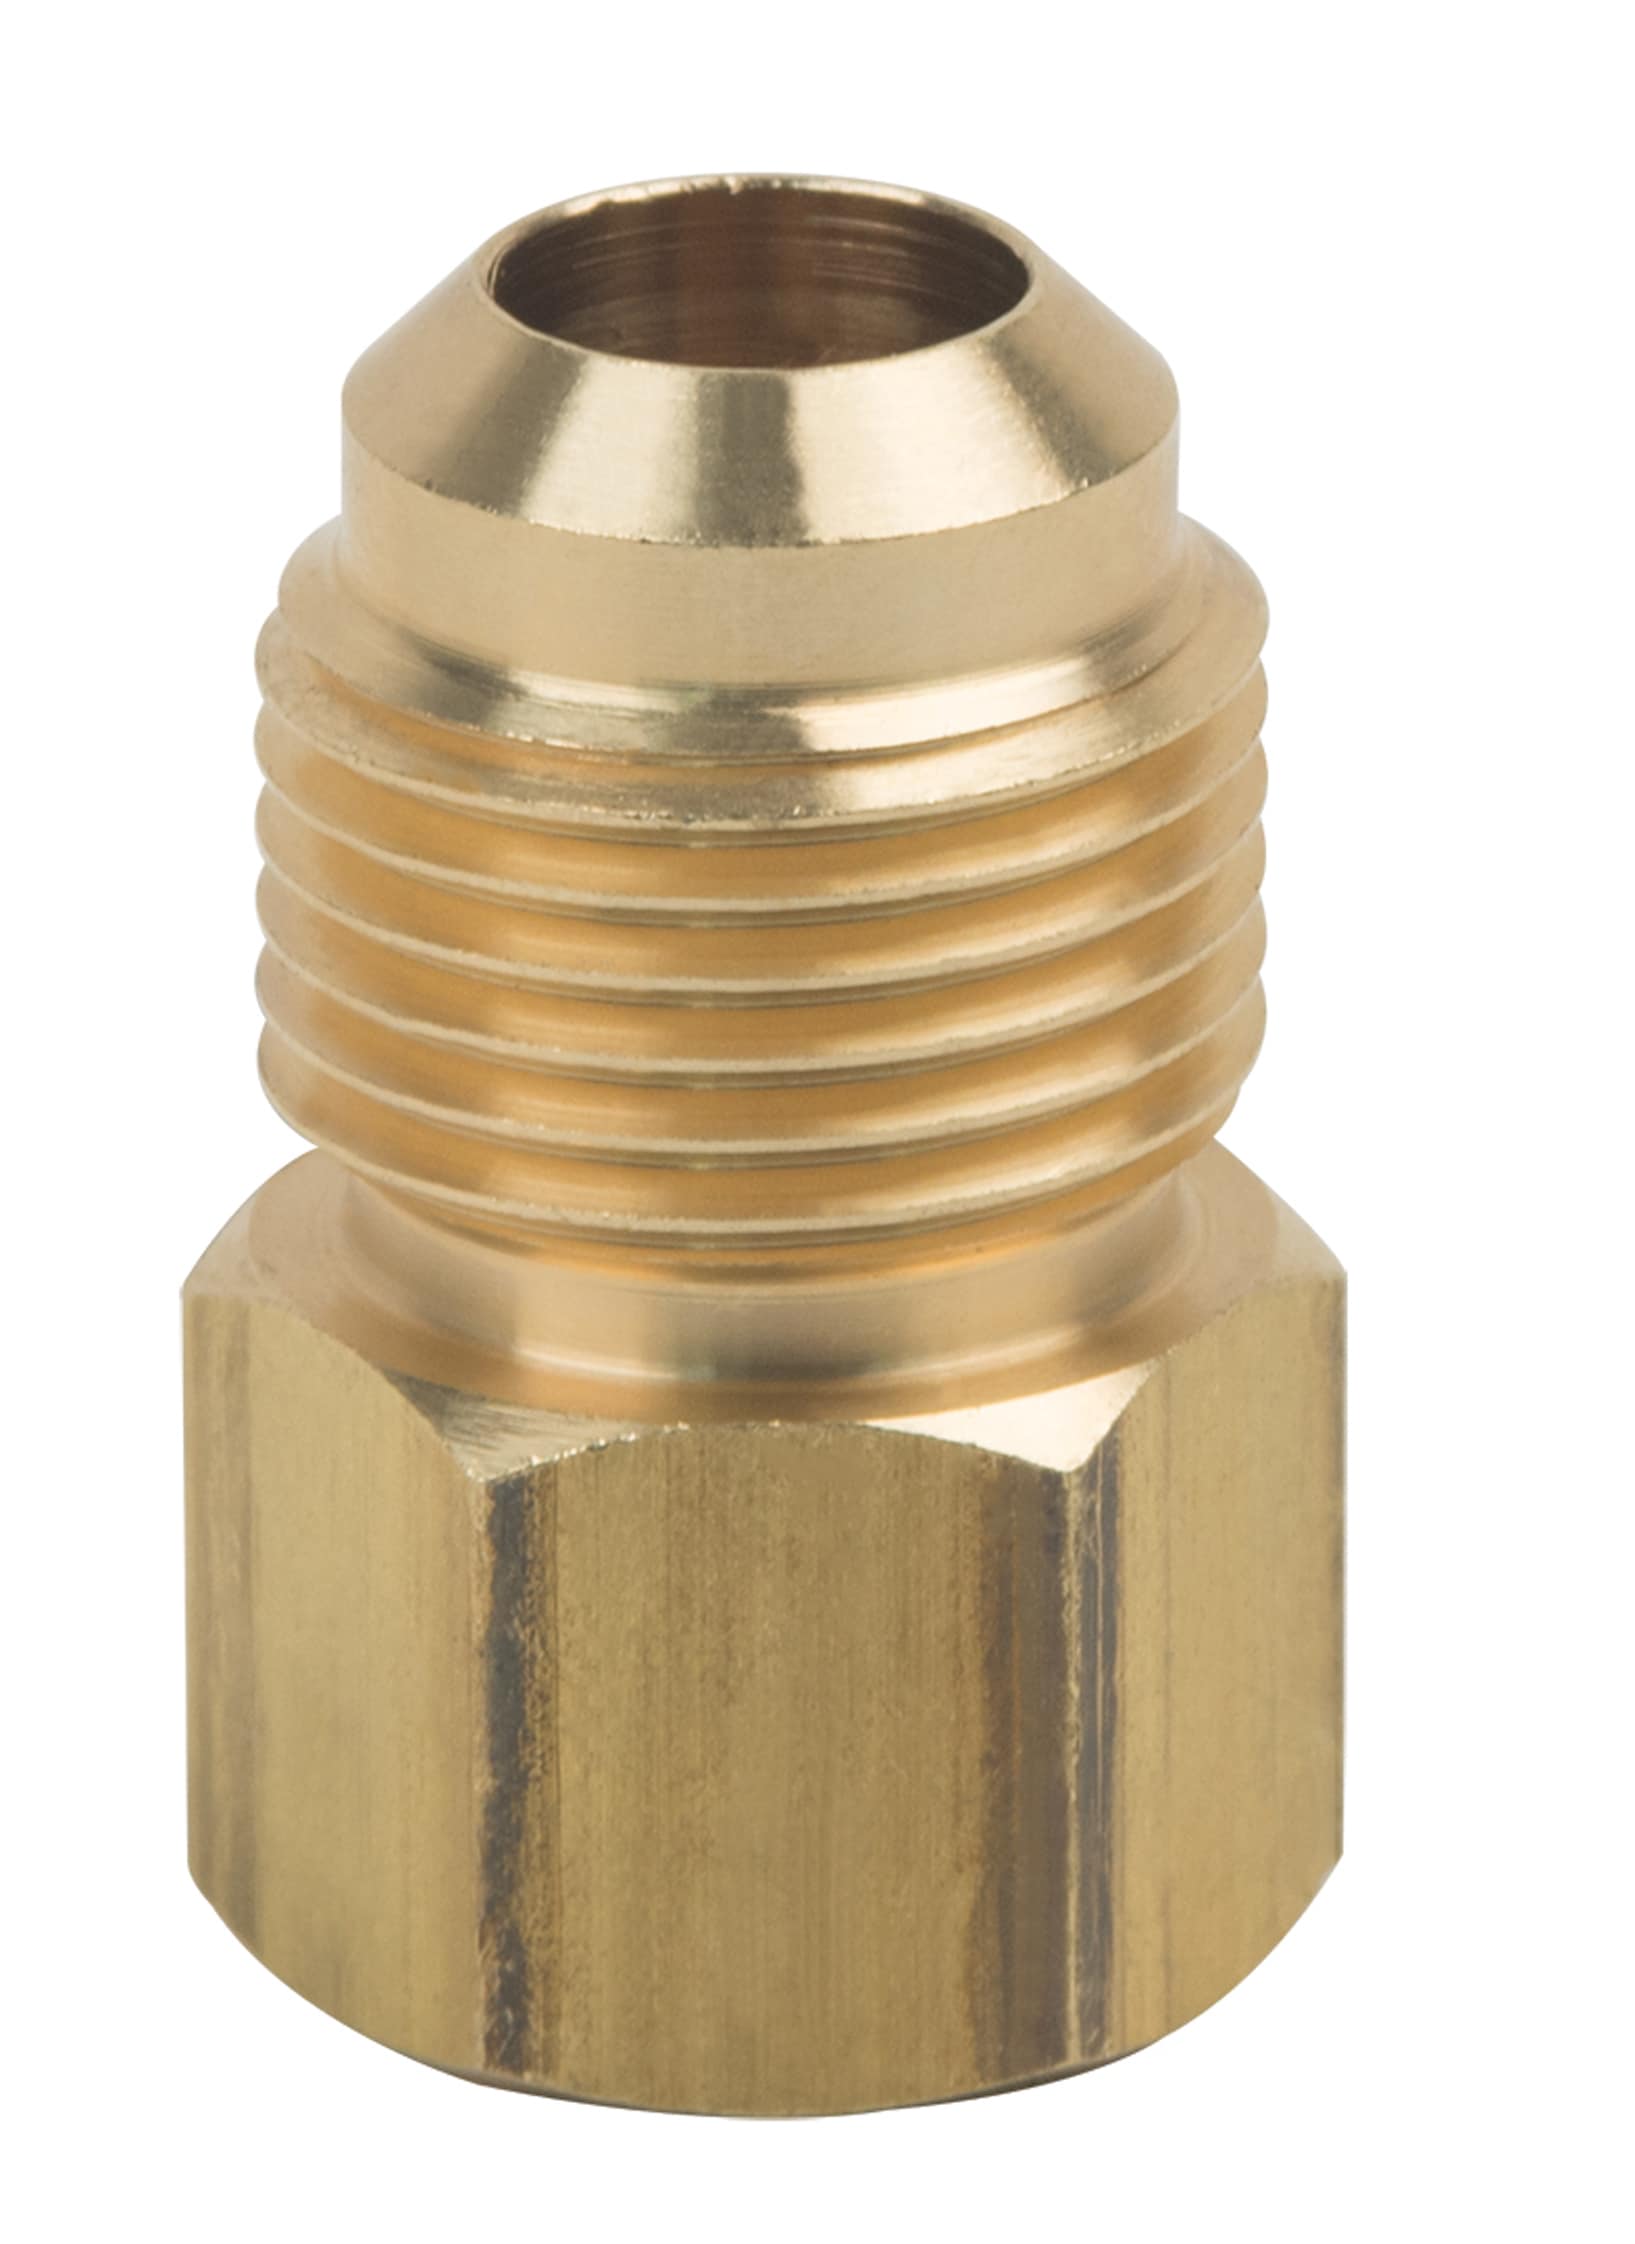 3/8" x 3/8" Brass Compression Union Fittings for fuel oil gas fluid air 5 